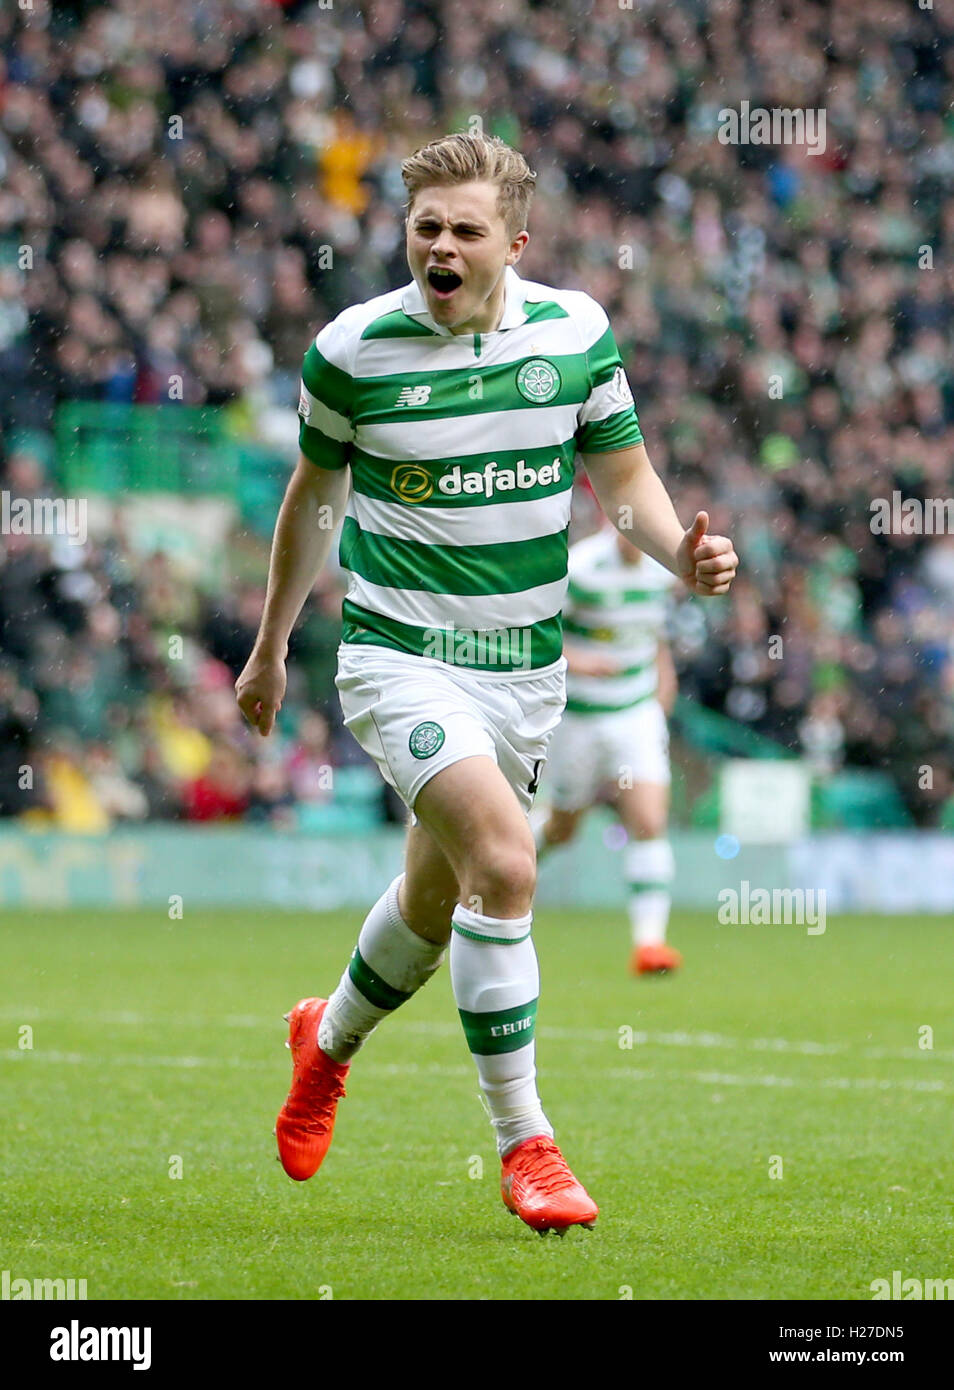 Celtic's James Forrest celebrates scoring his sides third goal of the match during the Ladbrokes Scottish Premiership match at Celtic Park, Glasgow. PRESS ASSOCIATION Photo. Picture date: Saturday September 24, 2016. See PA story SOCCER Celtic. Photo credit should read: Jane Barlow/PA Wire. Stock Photo